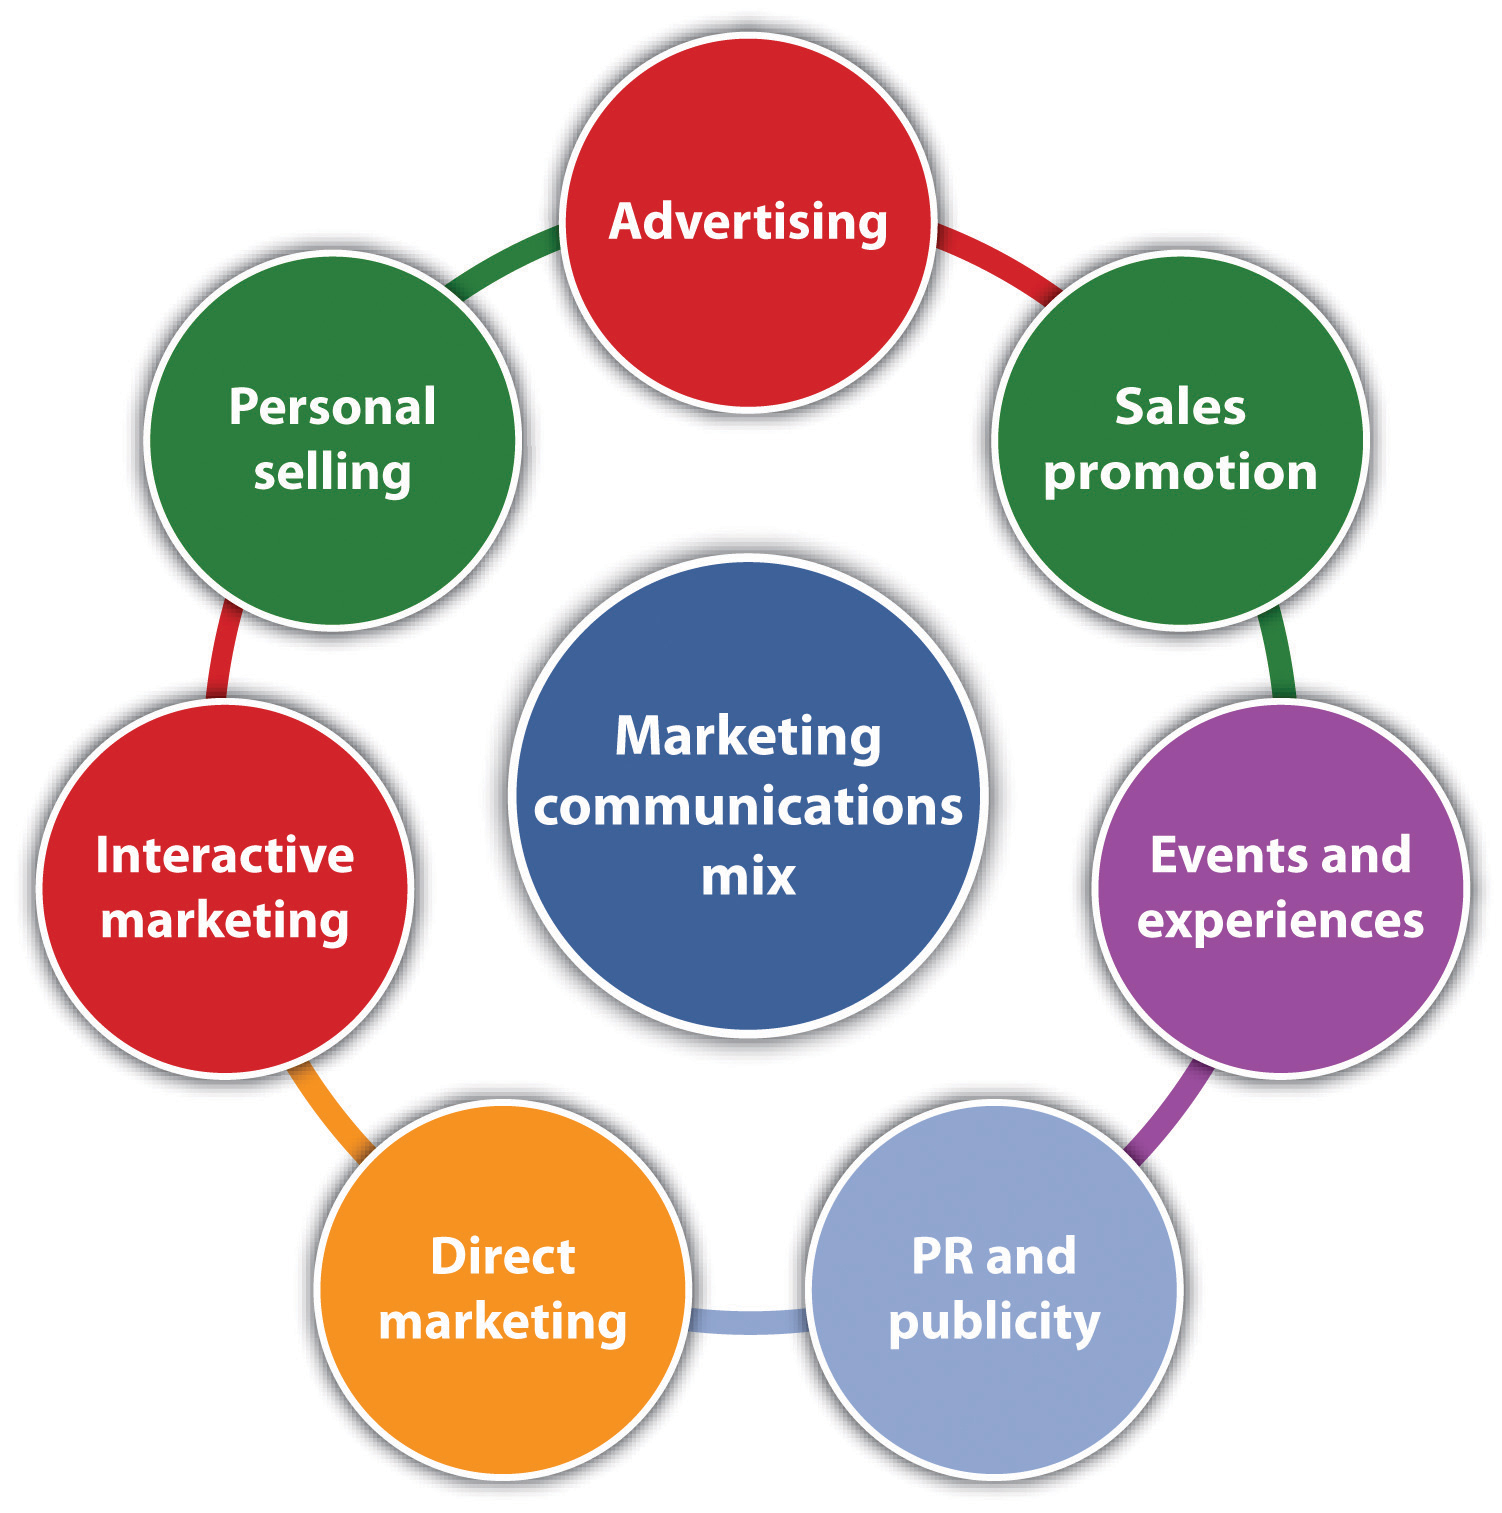 what are the major shortcomings of marketing-mix modeling